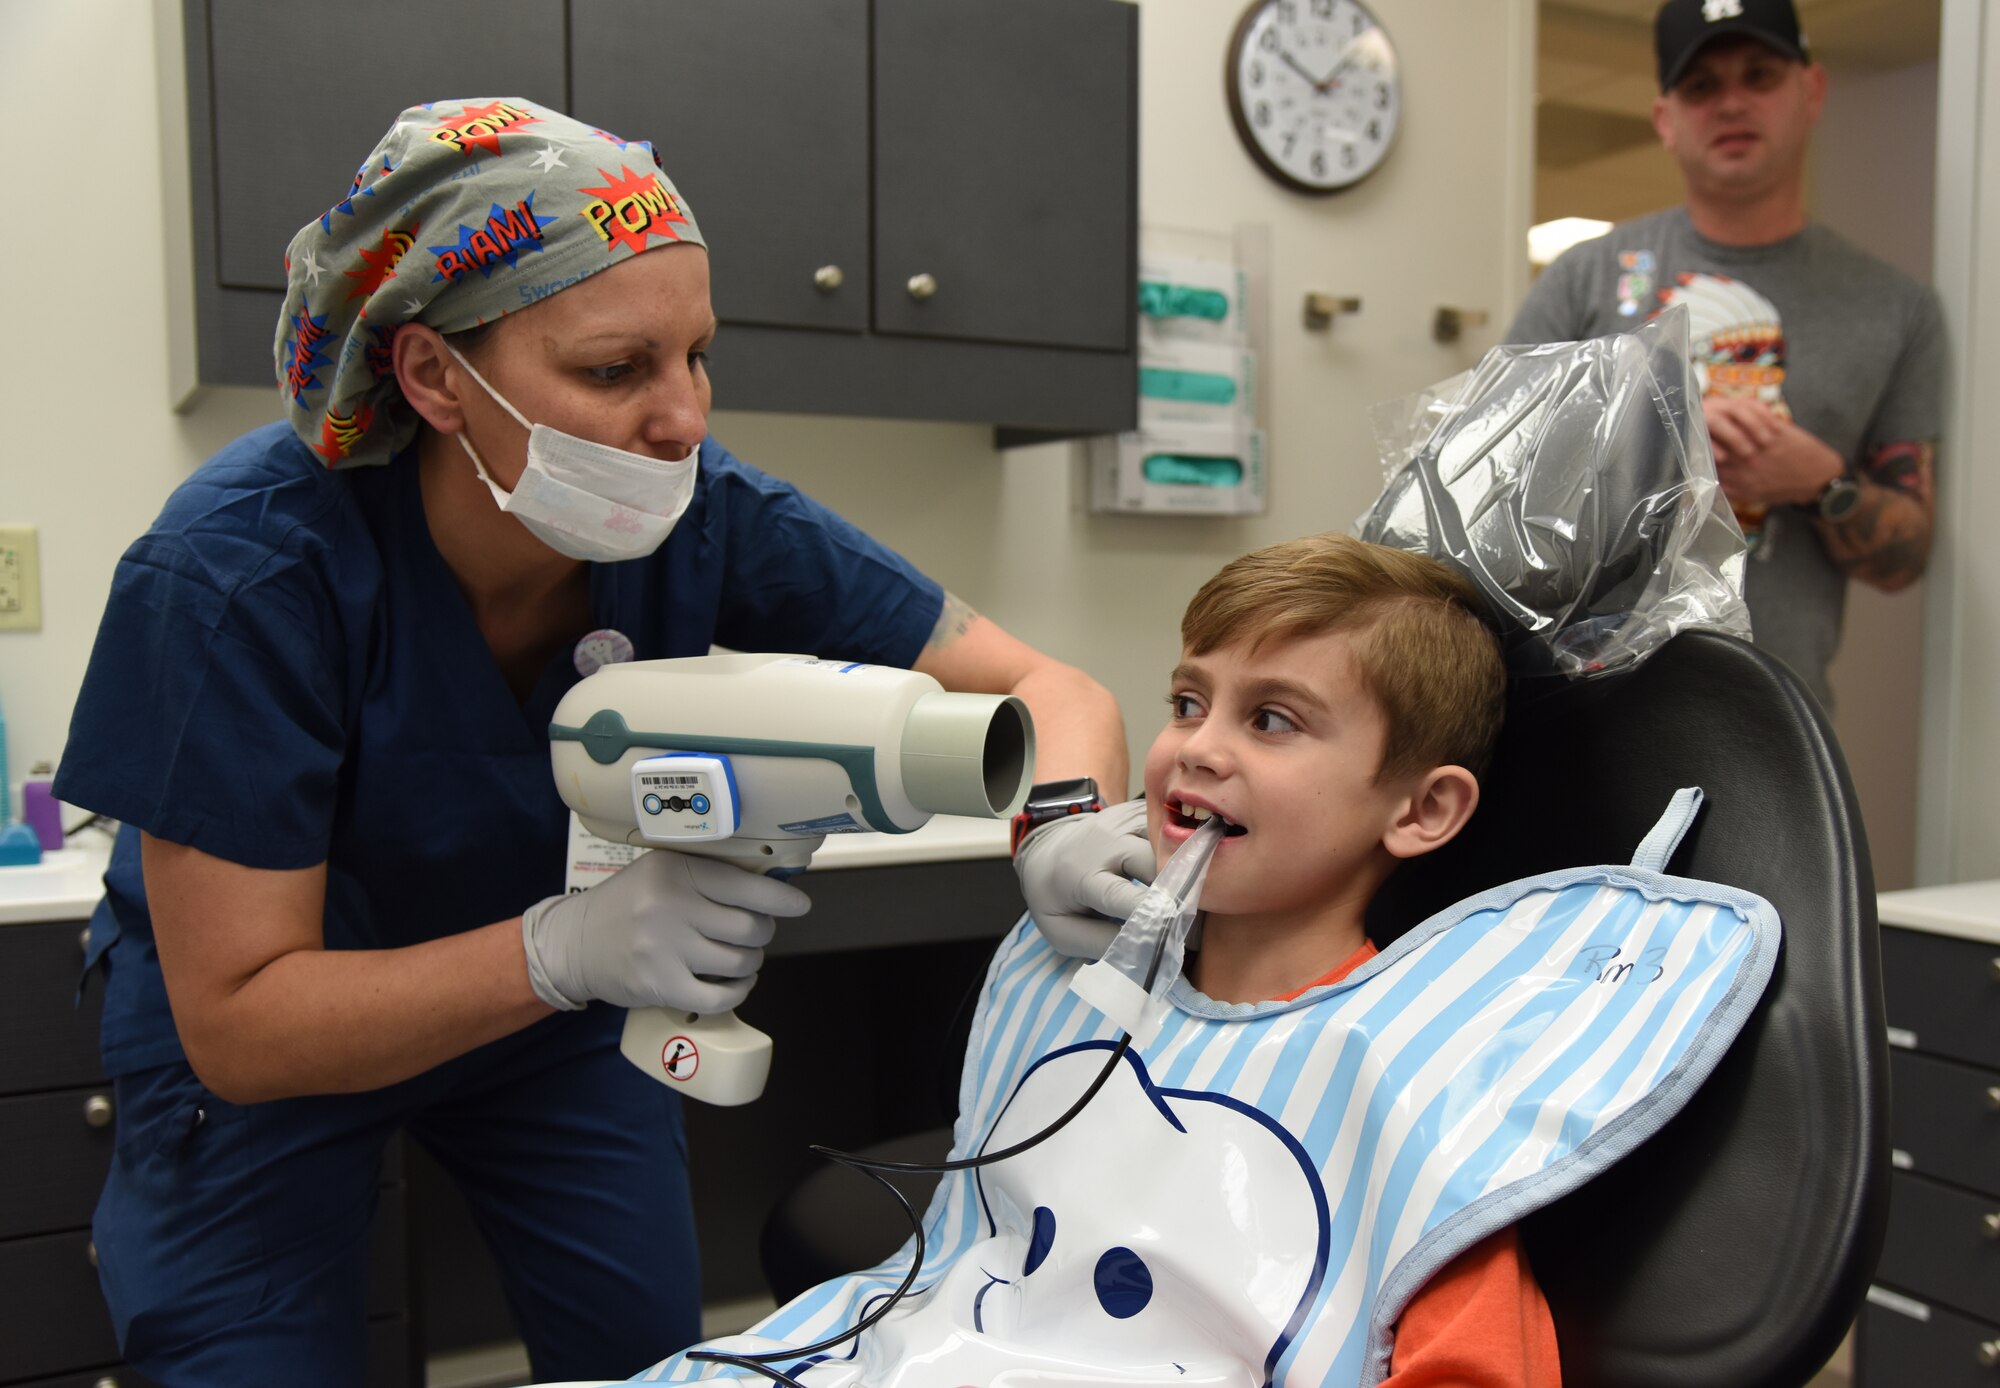 Regina Yarbrough, 81st Dental Squadron dental technician, conducts an X-ray exam on Raylan Wanhala, son of U.S. Air Force Tech. Sgt. Daniel Wanhala, 81st Security Forces Squadron flight chief, as his dad stands by during the 9th Annual Give Kids a Smile Day at the dental clinic inside the Keesler Medical Center at Keesler Air Force Base, Mississippi, Feb. 15, 2019. The event was held in recognition of National Children's Dental Health Month and included free dental exams, radiographs and cleanings for children age two and older. (U.S. Air Force photo by Kemberly Groue)